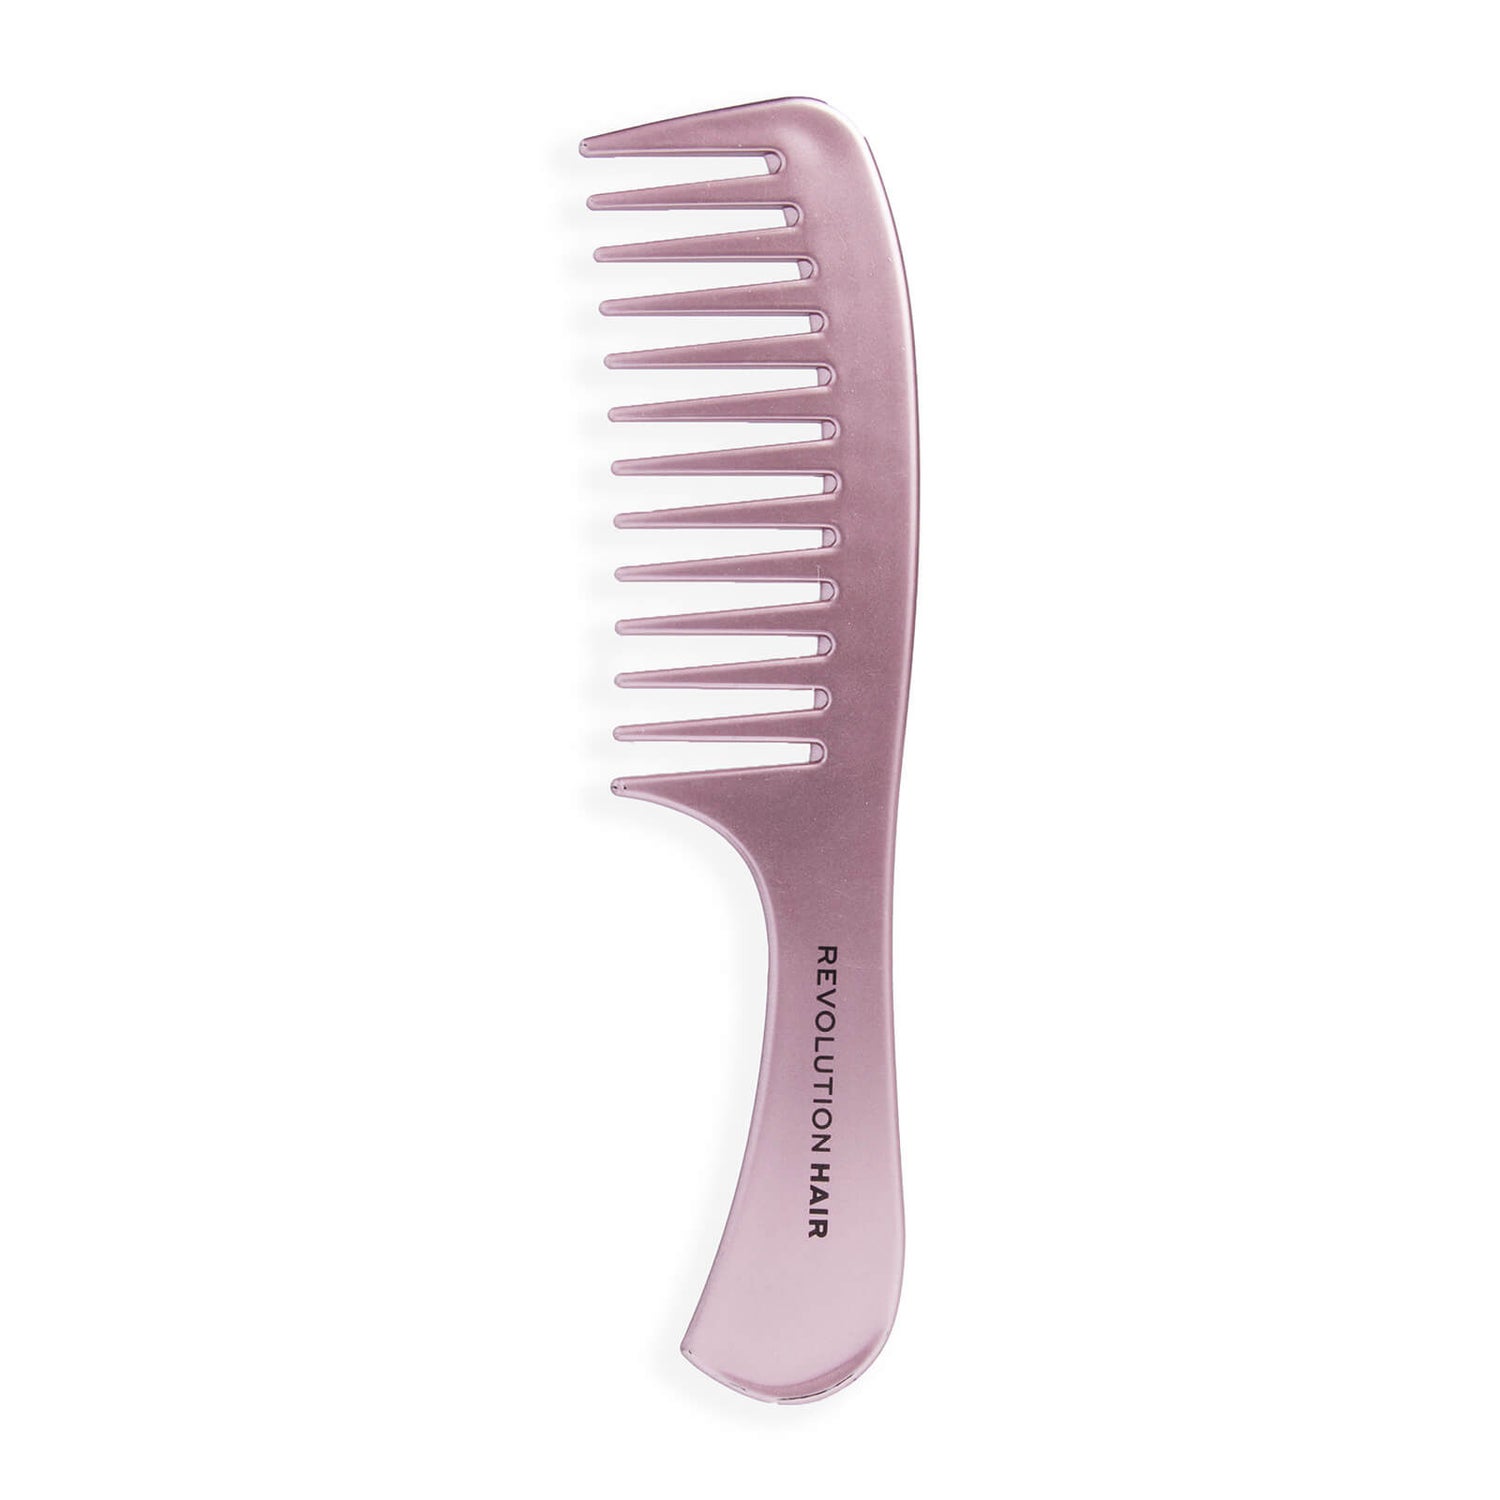 Revolution Natural Wave Wide Toothcomb White